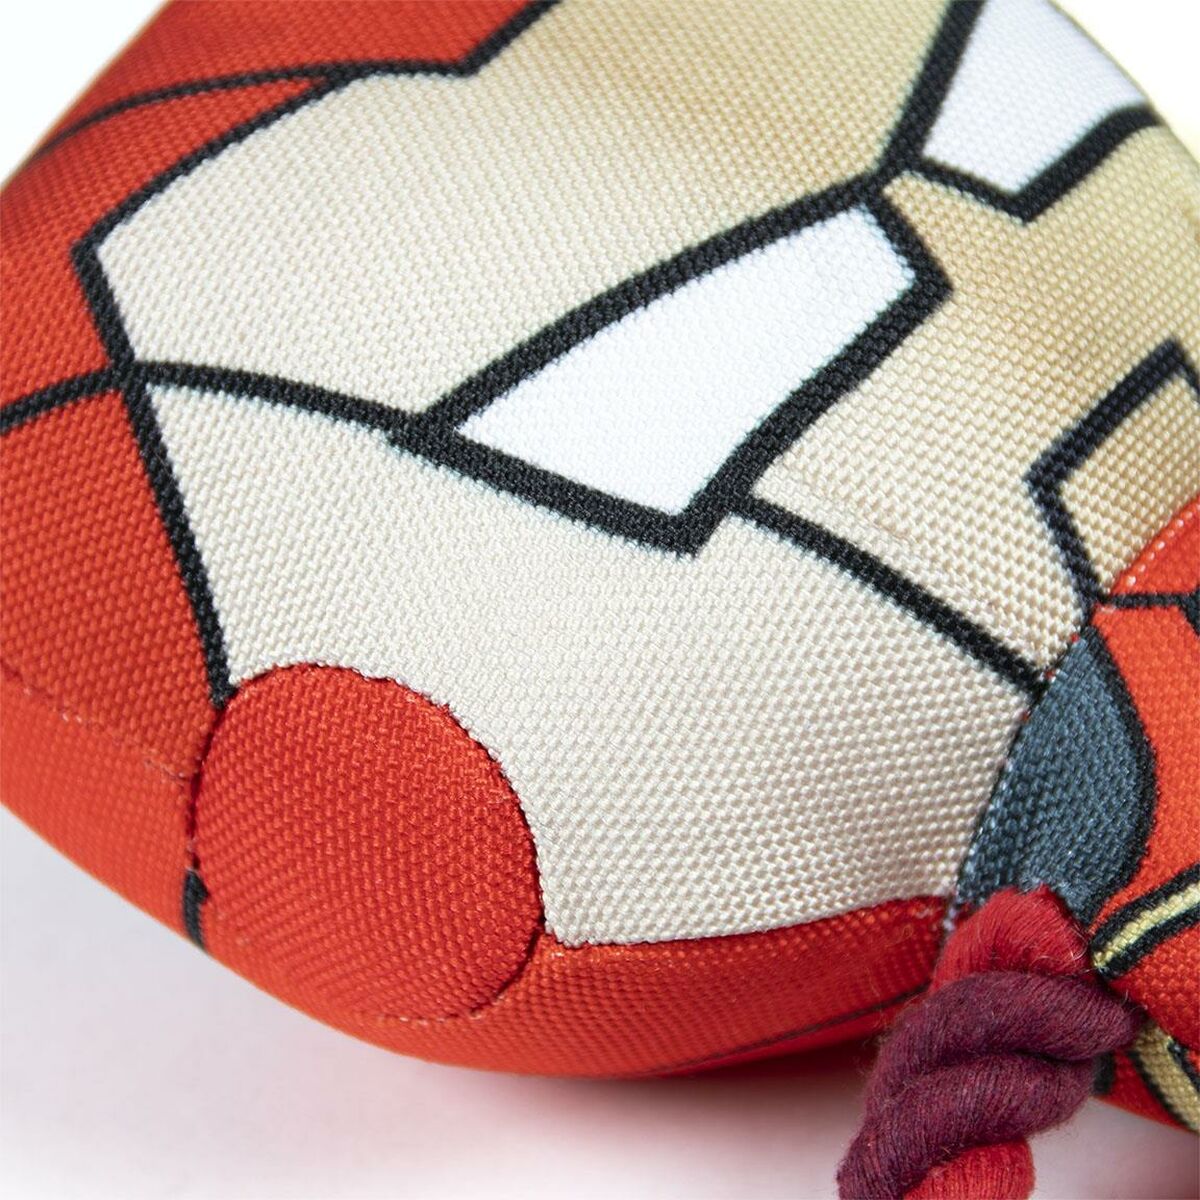 Dog toy The Avengers Red 13 x 11 x 18 cm